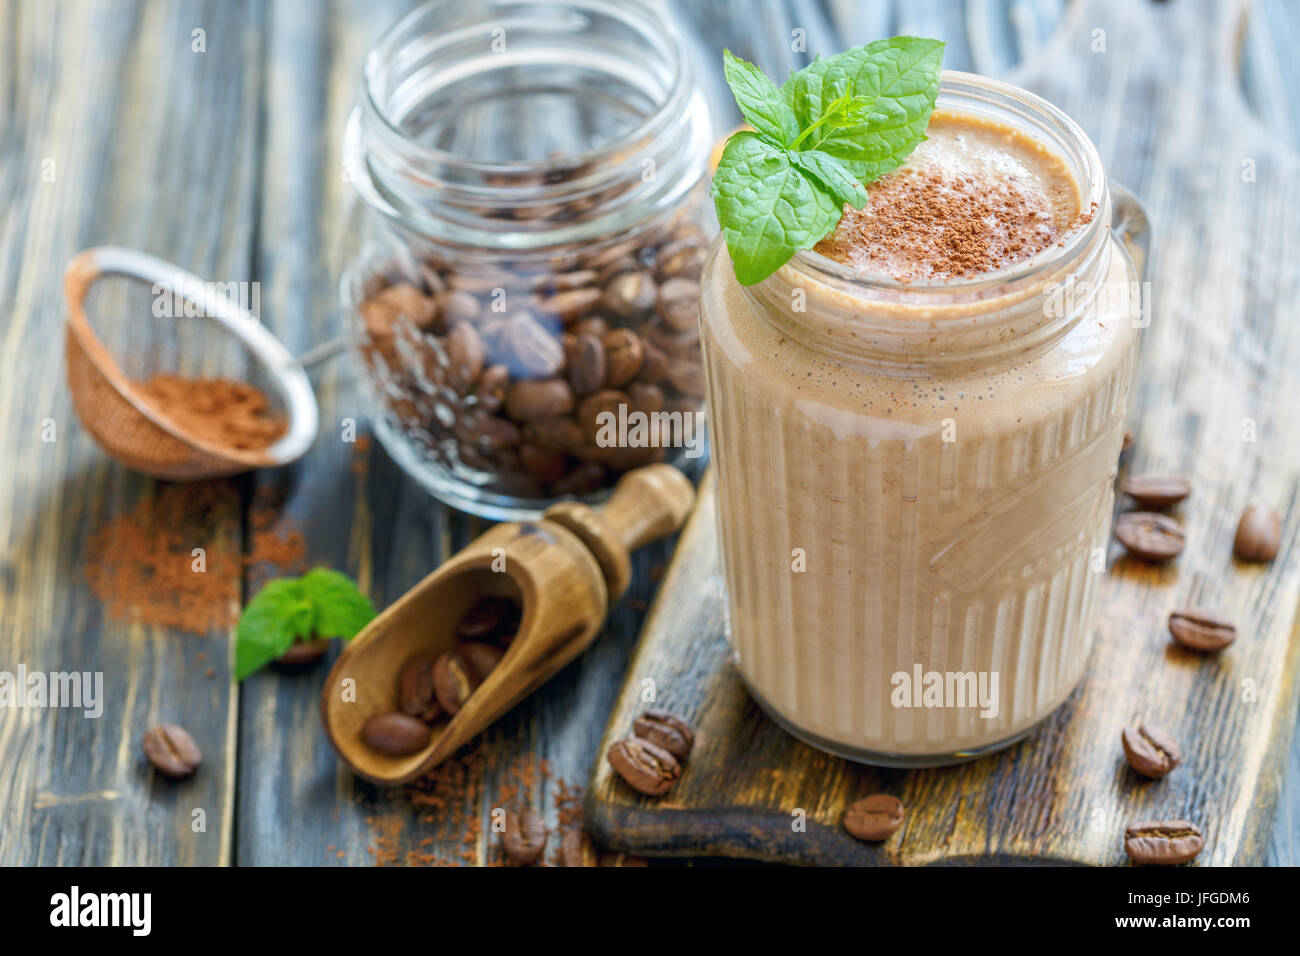 Coffee smoothie with banana in a glass jar. Stock Photo